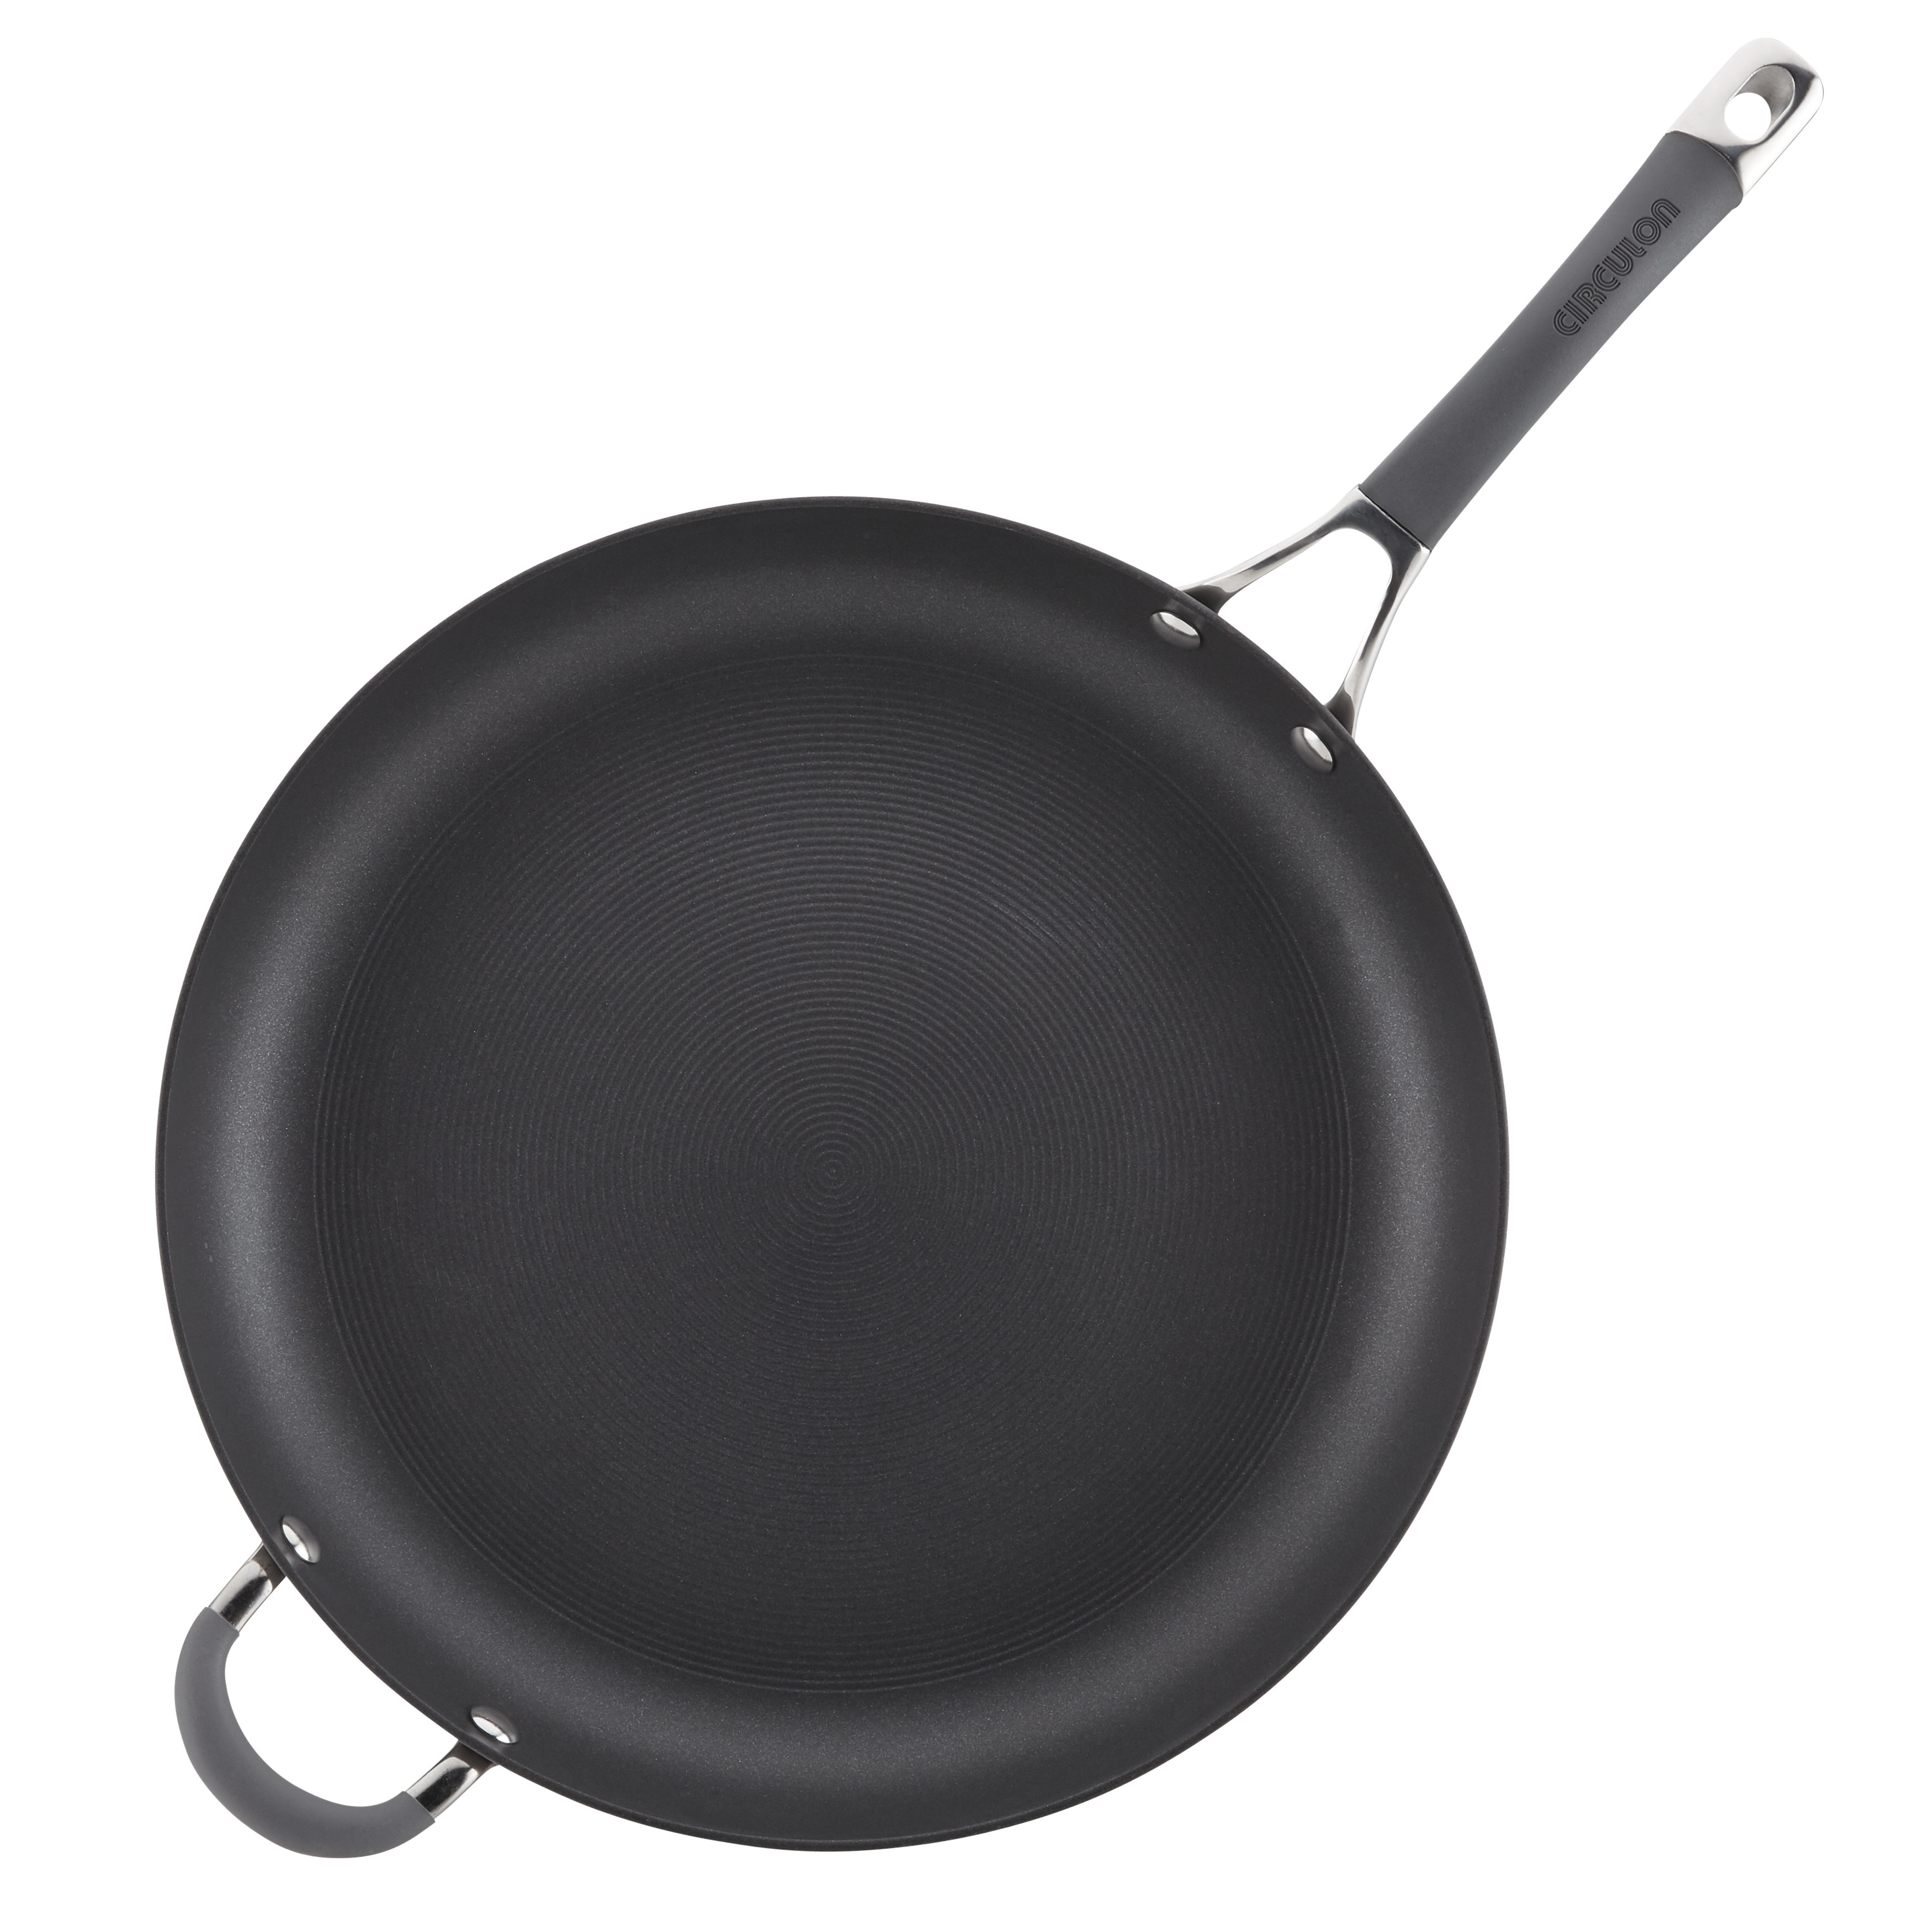 https://ak1.ostkcdn.com/images/products/is/images/direct/3505118f13140972830ac85f86096093e4031799/Circulon-Radiance-Hard-Anodized-Nonstick-Frying-Pan-with-Helper-Handle%2C-14-Inch%2C-Gray.jpg